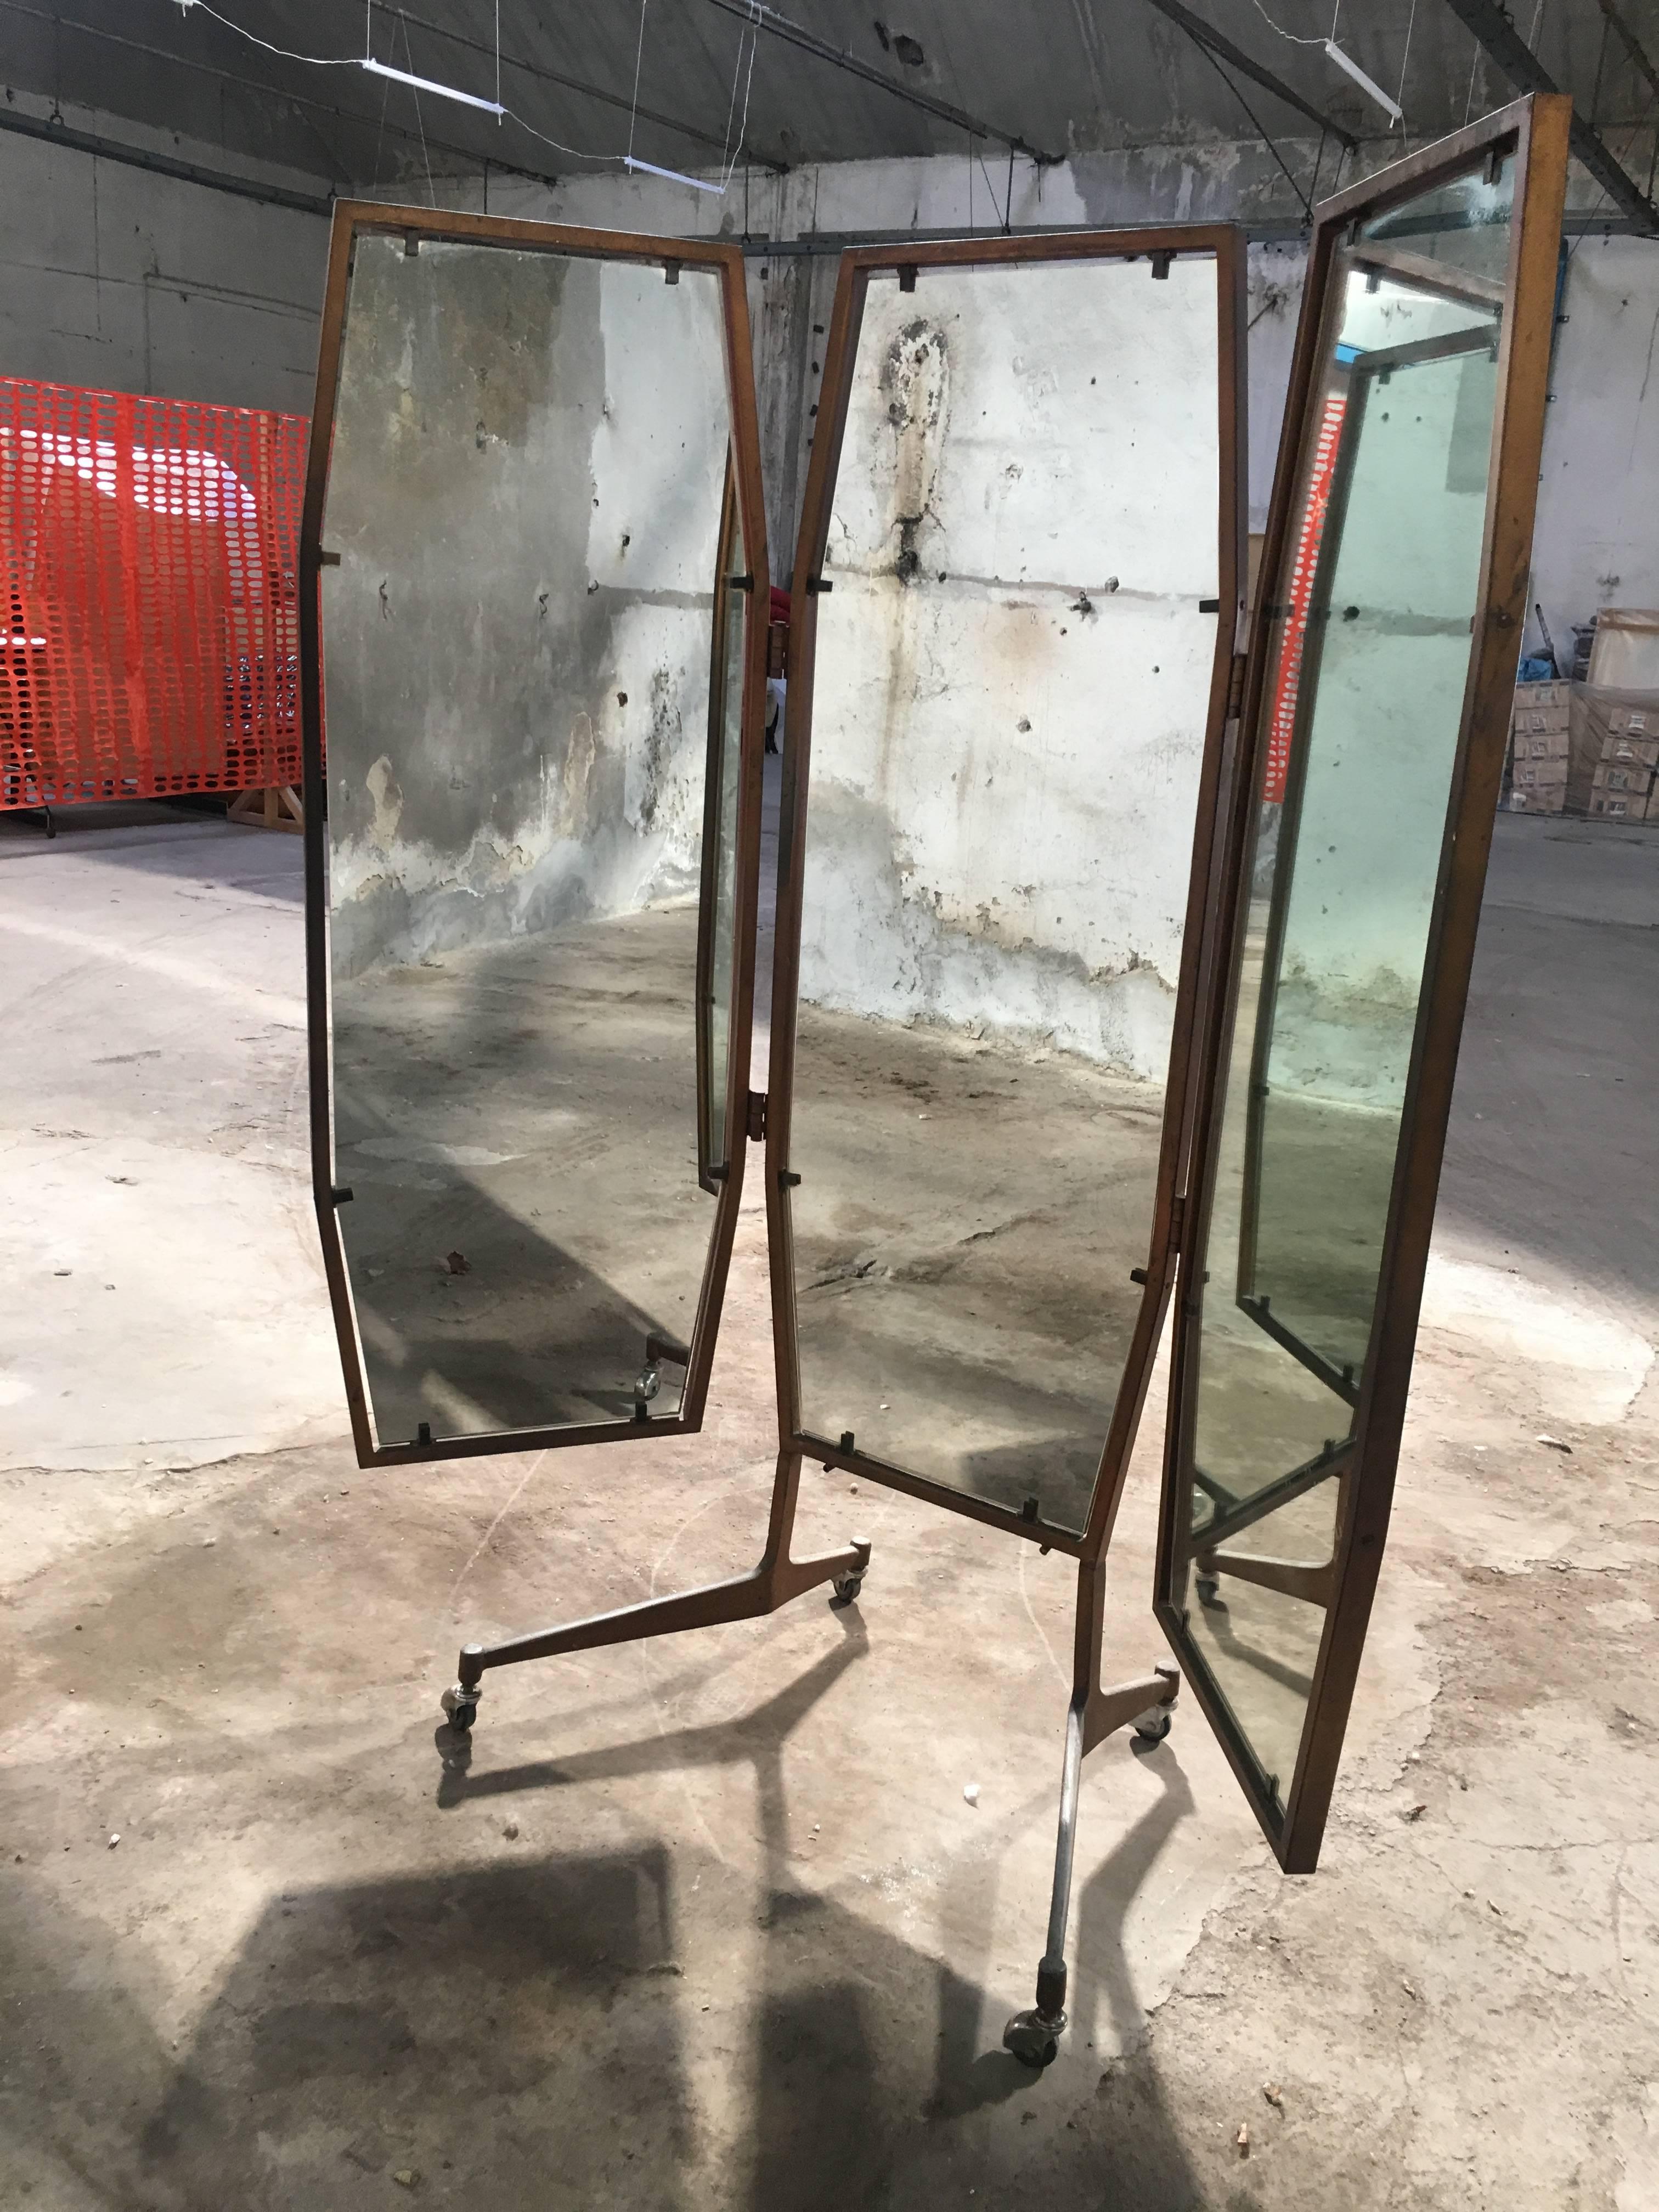 Italian triptych standing mirror on wheels from 1960s.
Measure: Basement on wheels cm.86 x 65
Total height cm.177
Central mirror: width cm.56
Lateral mirrors: width cm.53.